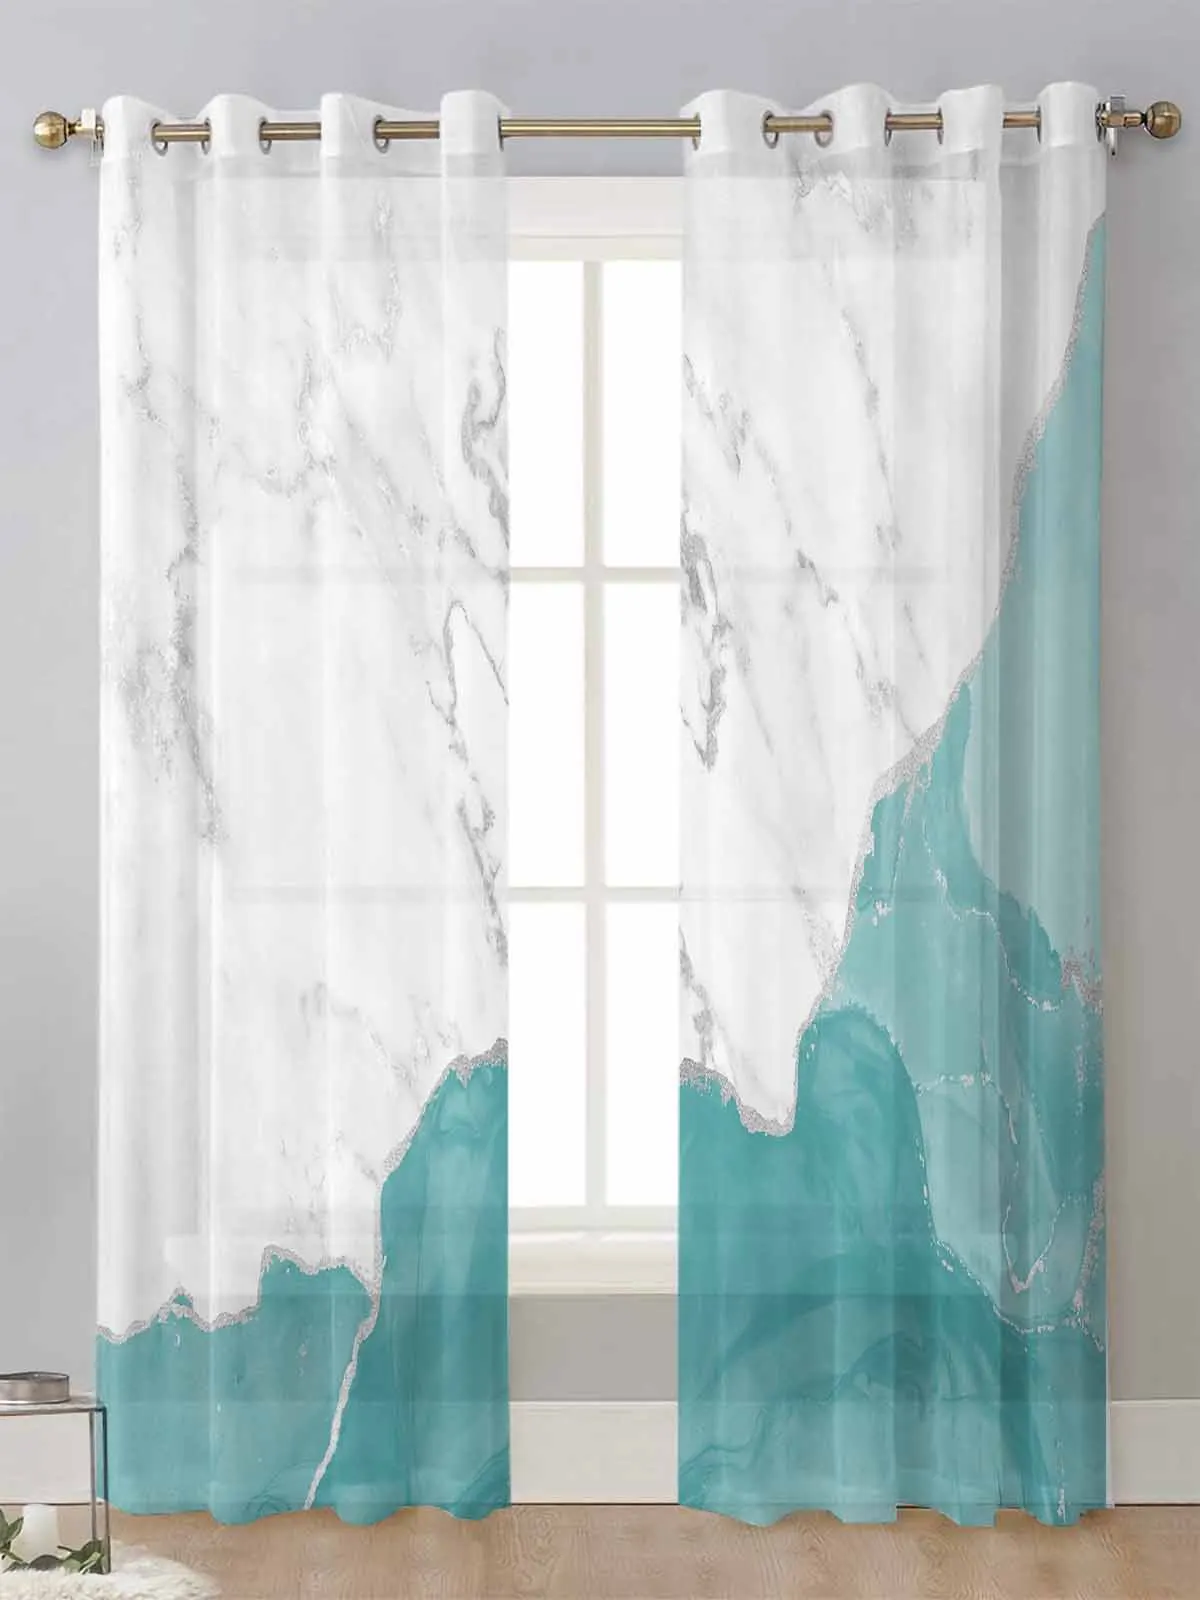 

White Marble Aqua Green Sheer Curtains For Living Room Window Transparent Voile Tulle Curtain Cortinas Drapes Home Decor